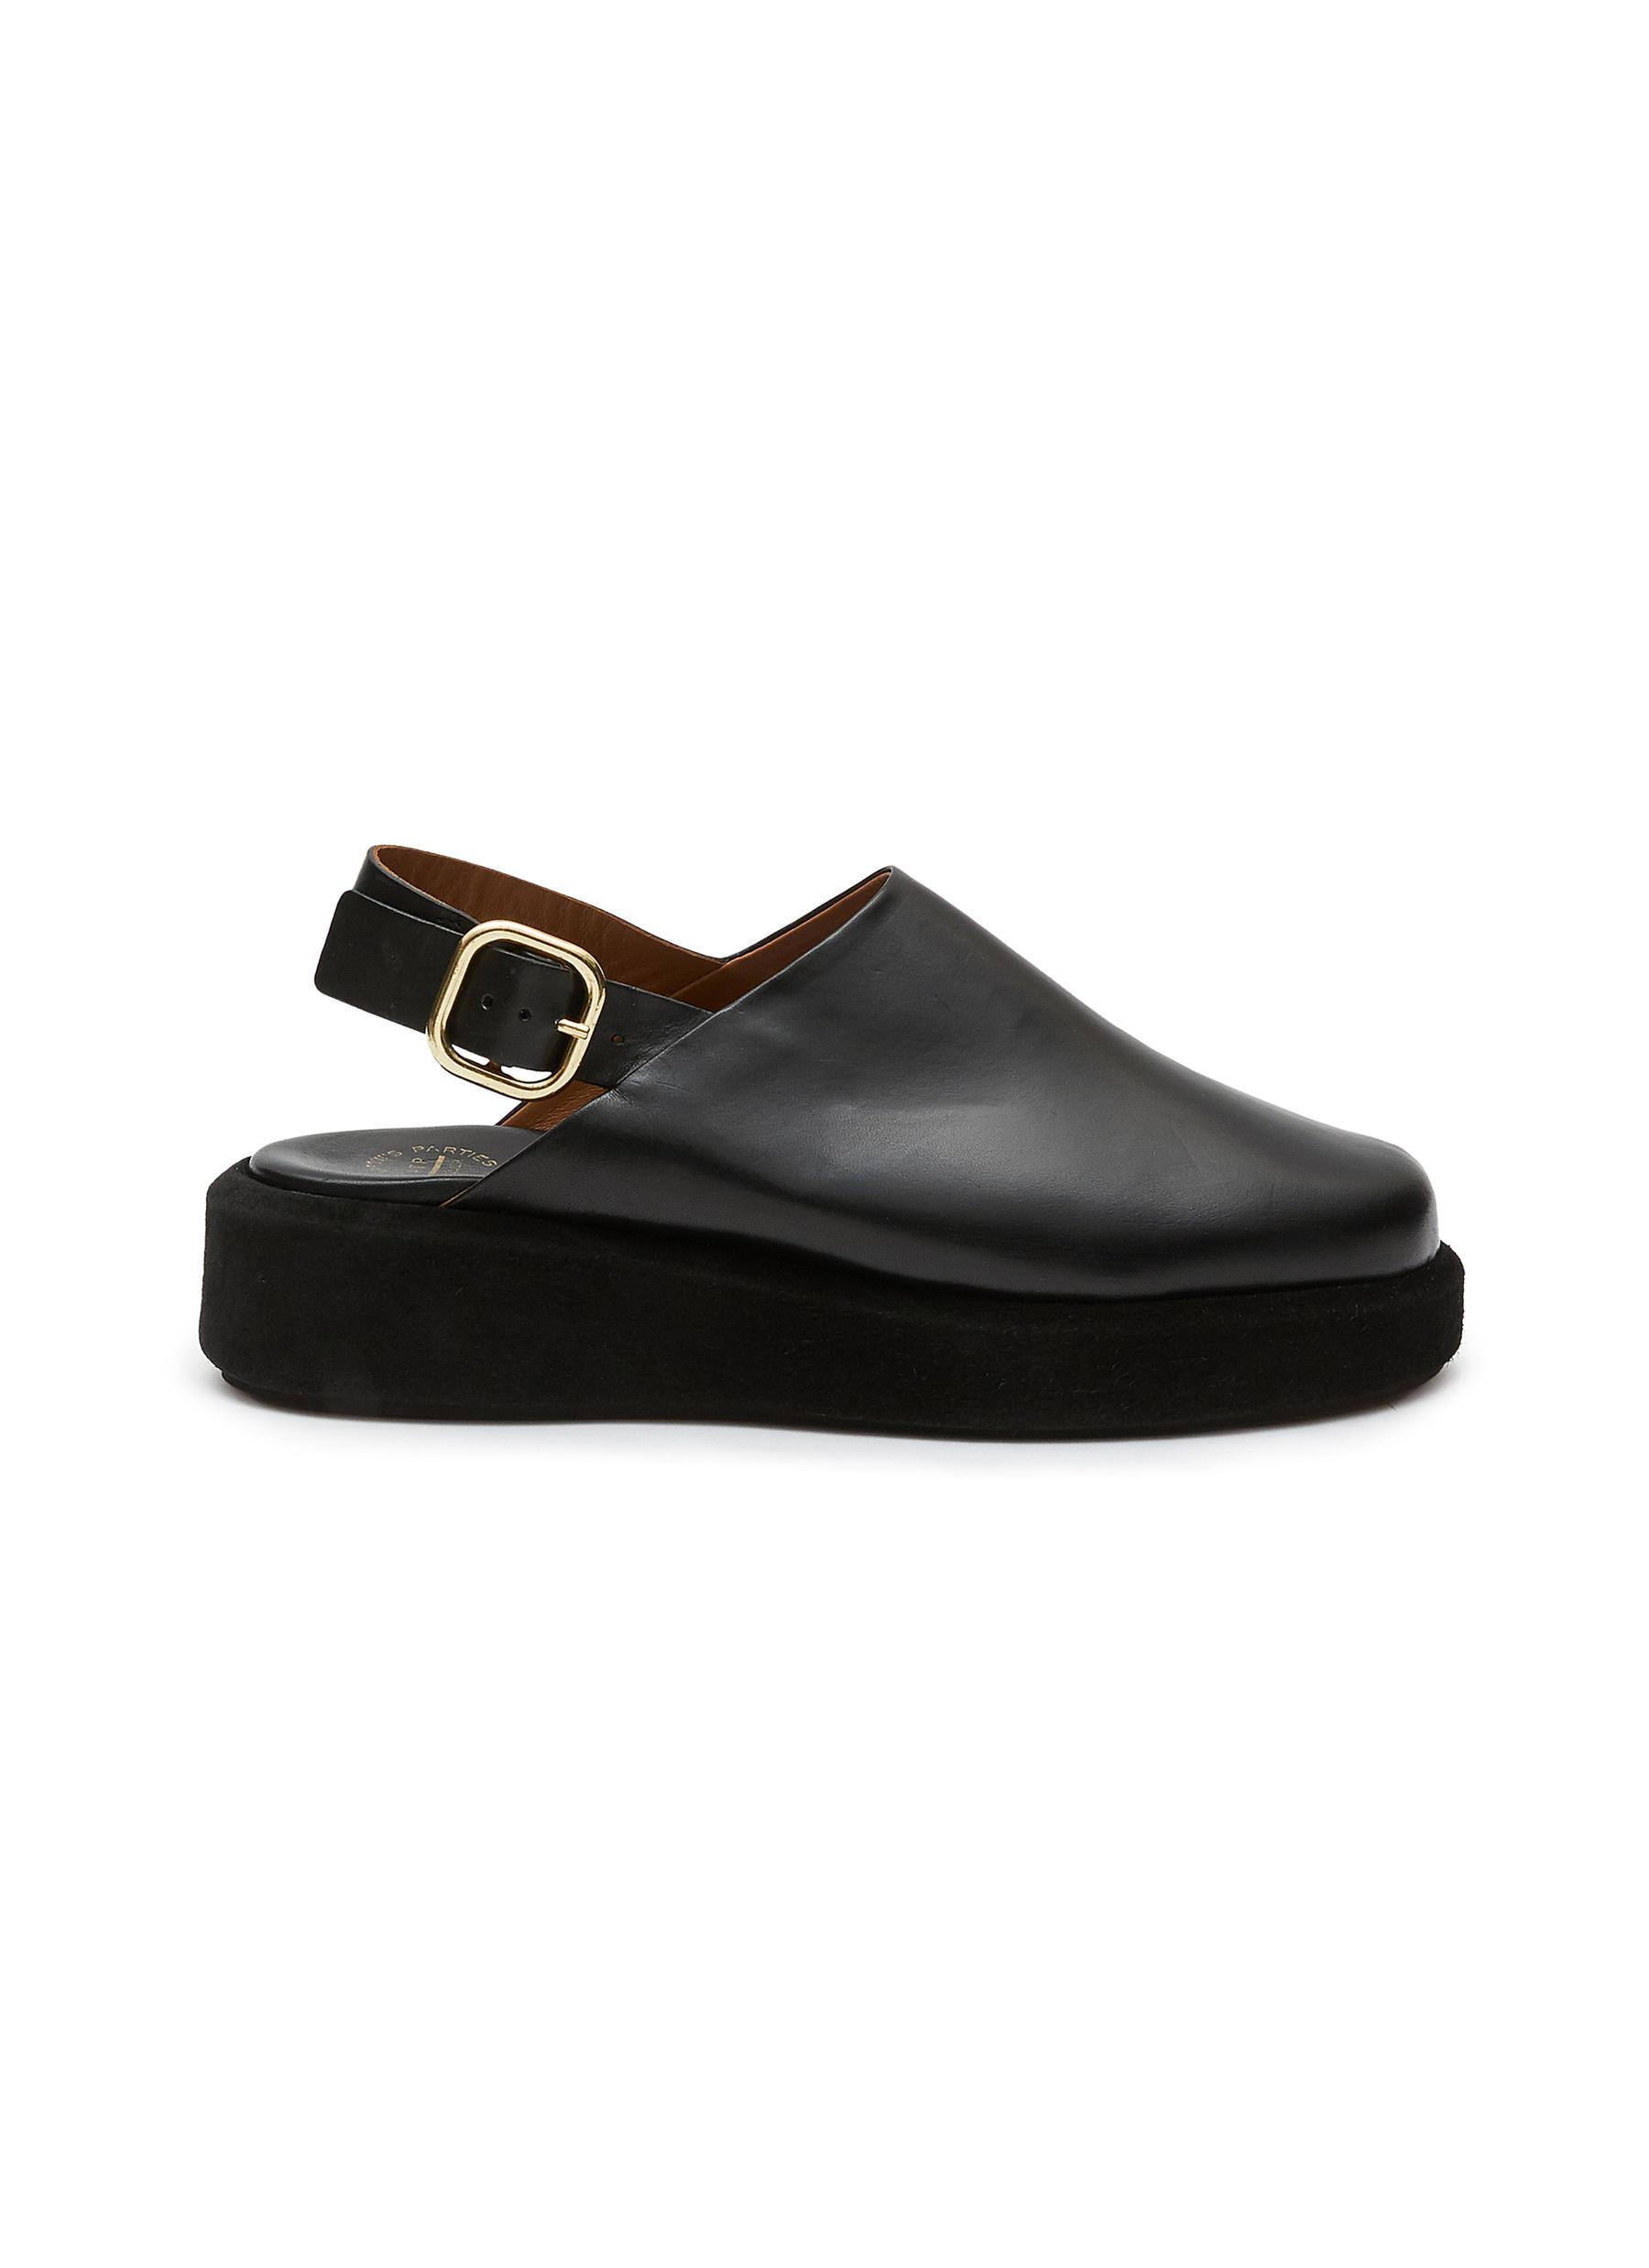 'Lecco' round-toe leather platform mules